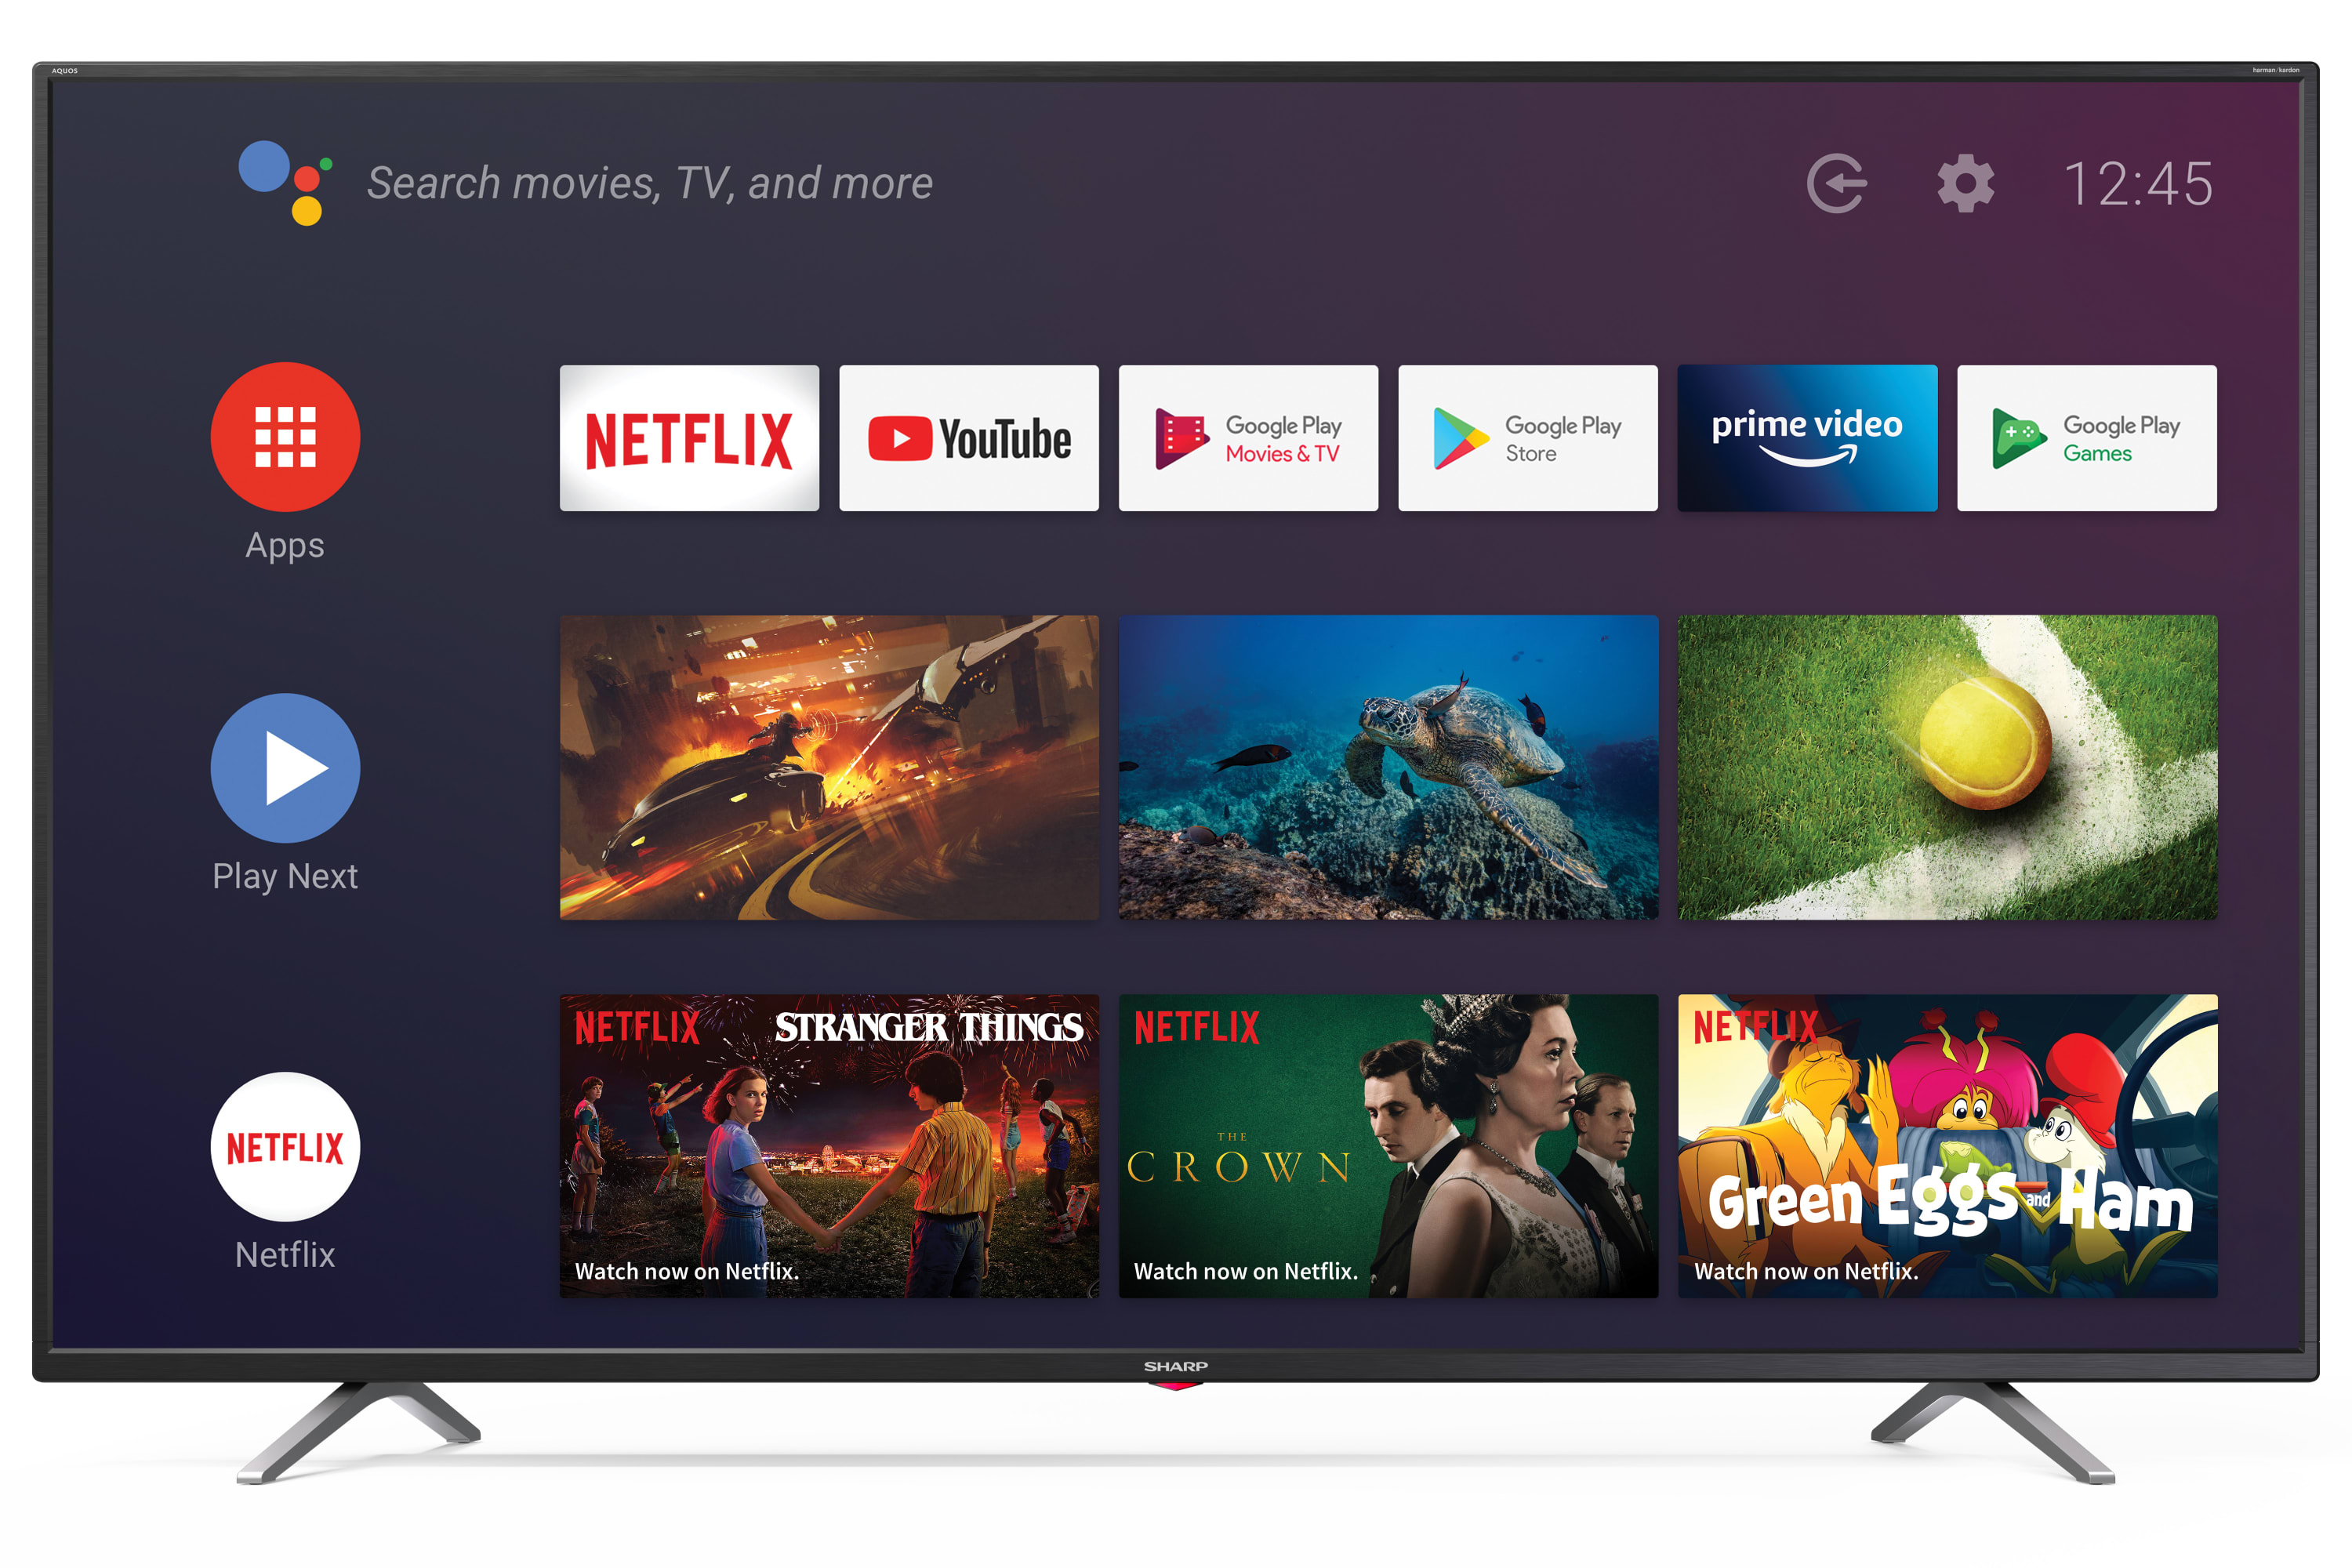 Android TV 4K UHD - 65" ANDROID TV™ ULTRA HD 4K